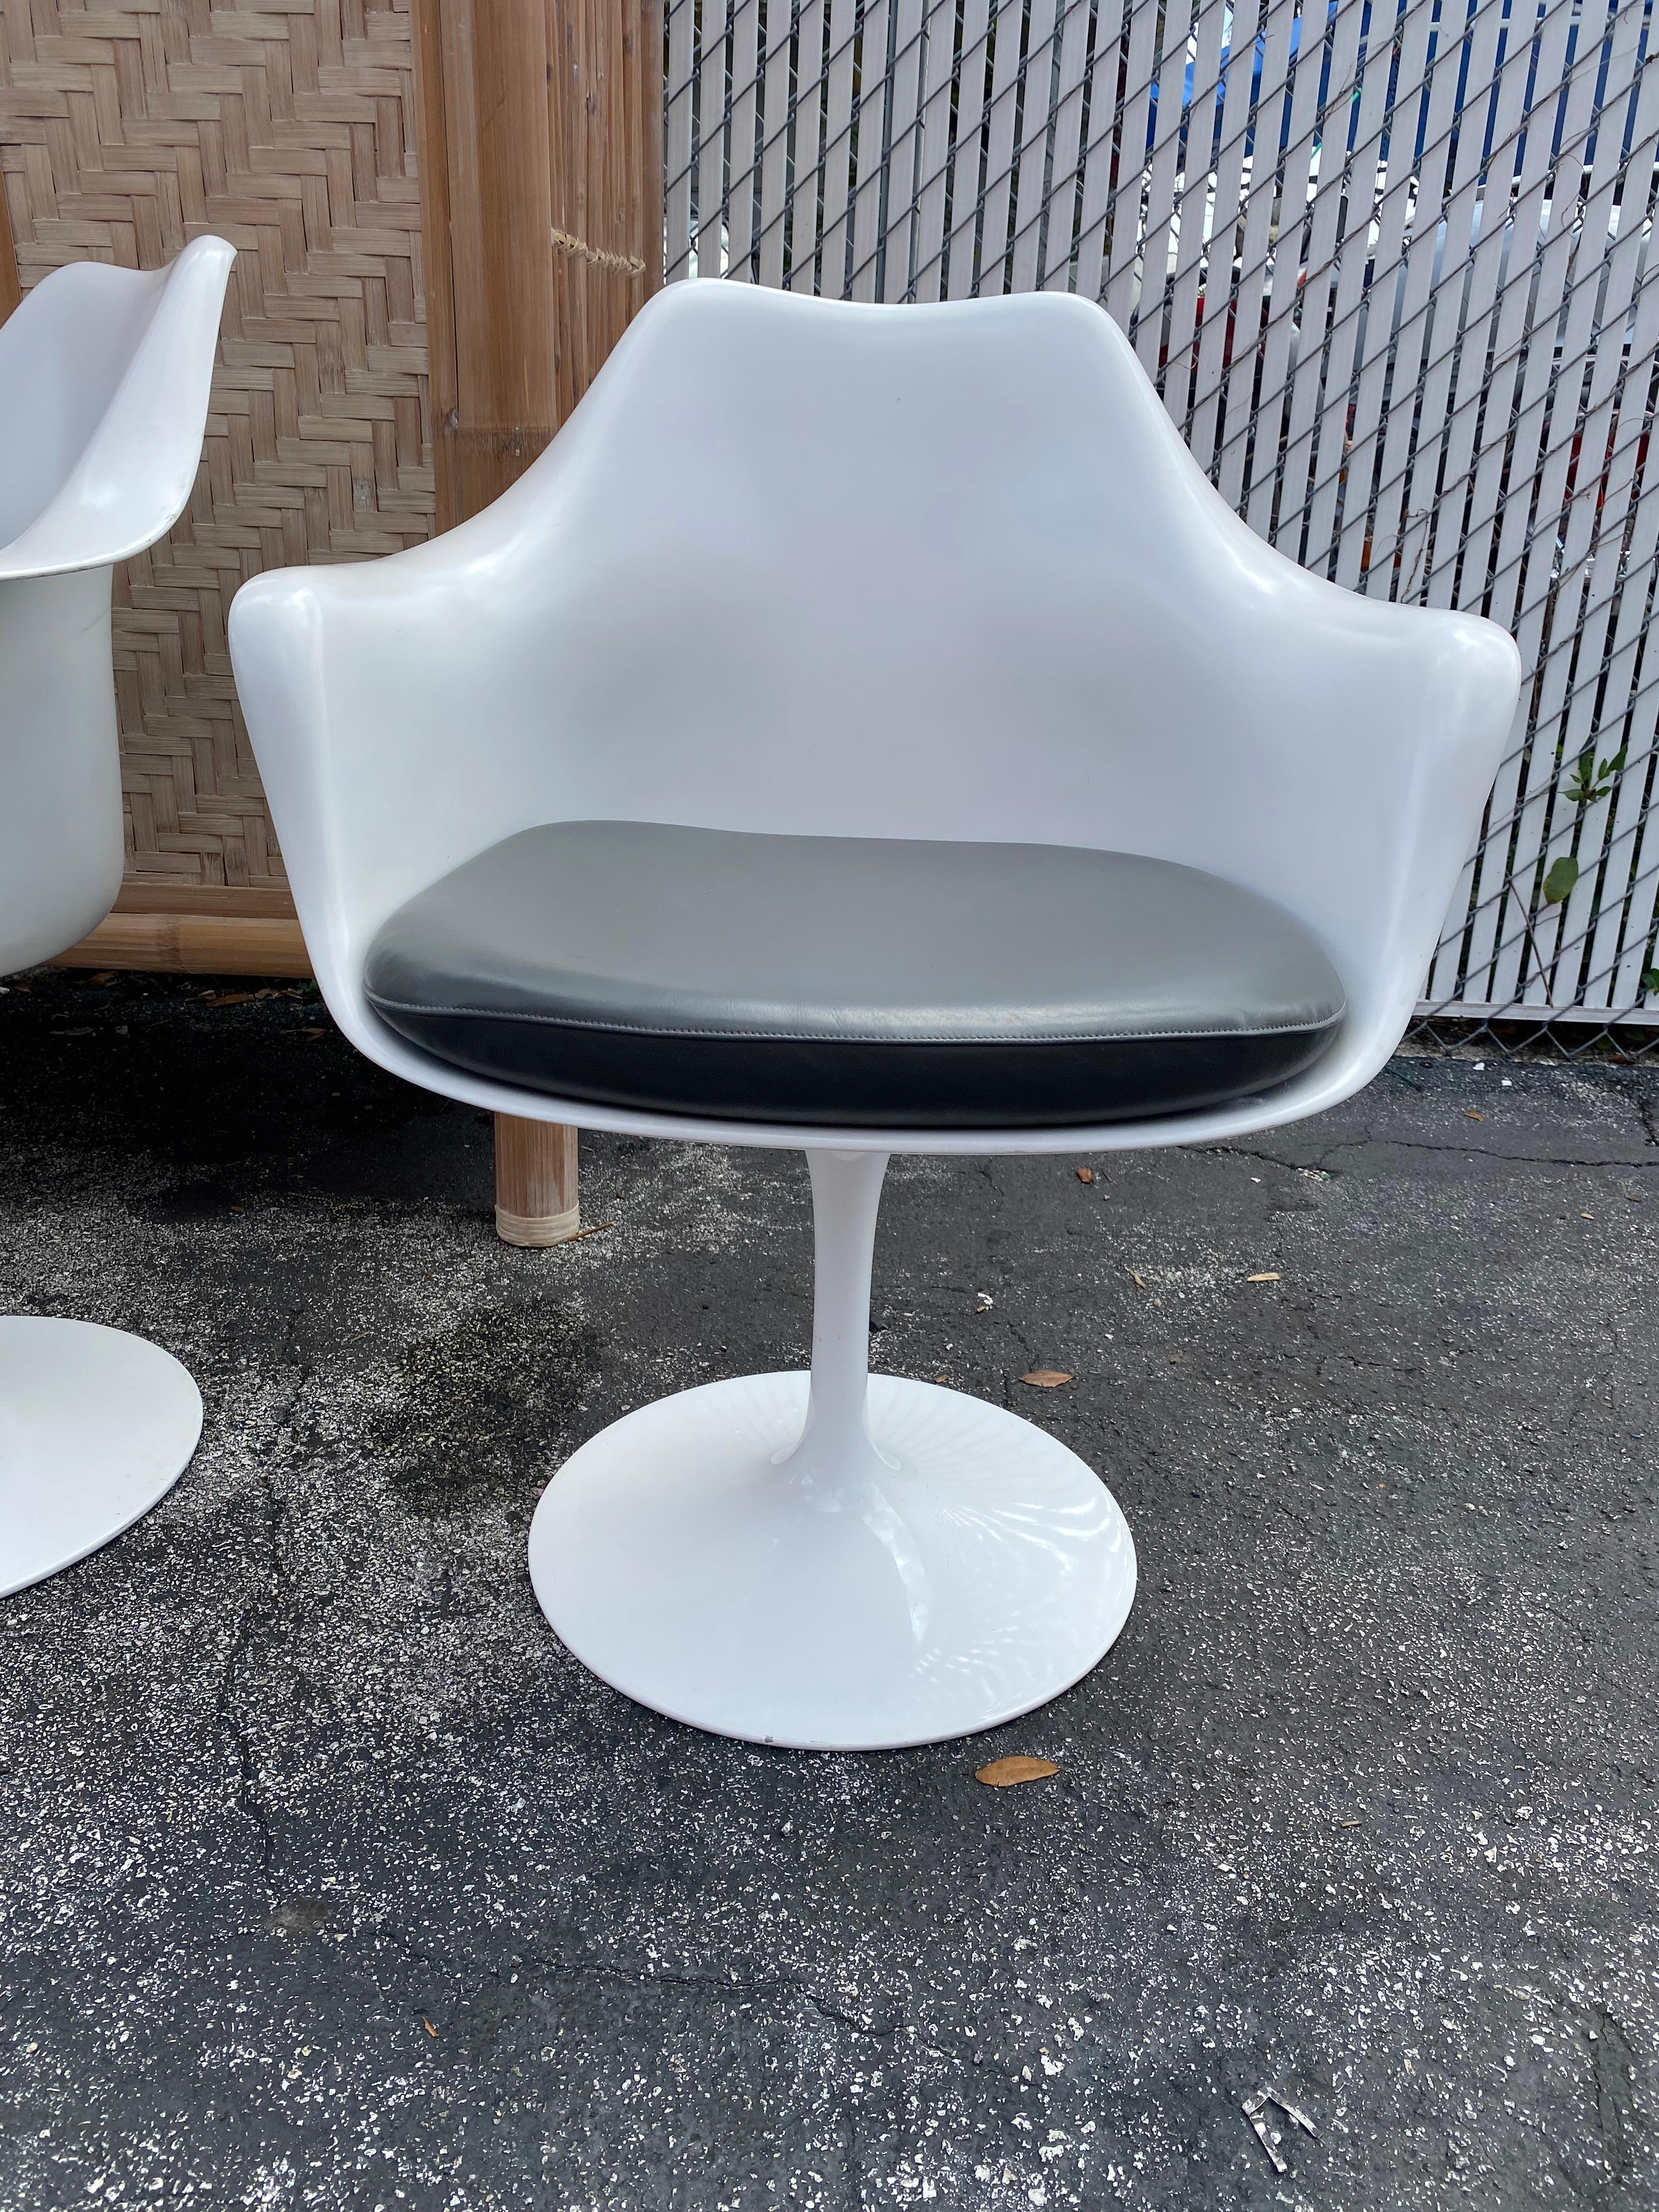 1970s Swivel Tulip Leather Chairs Eero Saarinen for Knoll, Set of 4 For Sale 4